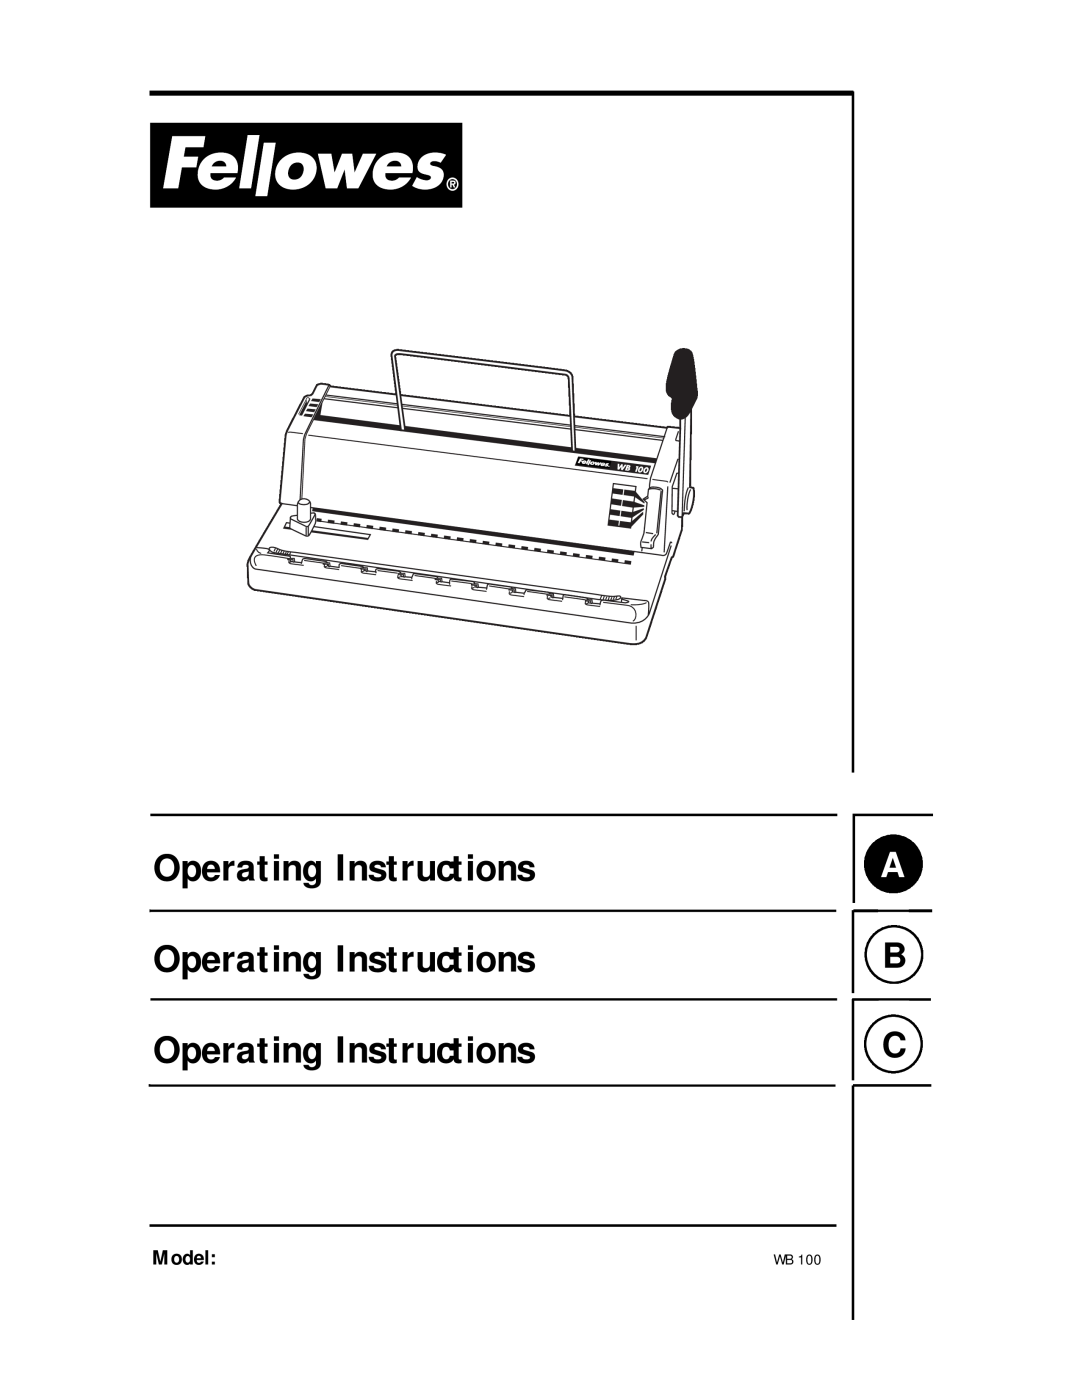 Fellowes WB 100 manual Operating Instructions Operating Instructions Operating Instructions, Model 